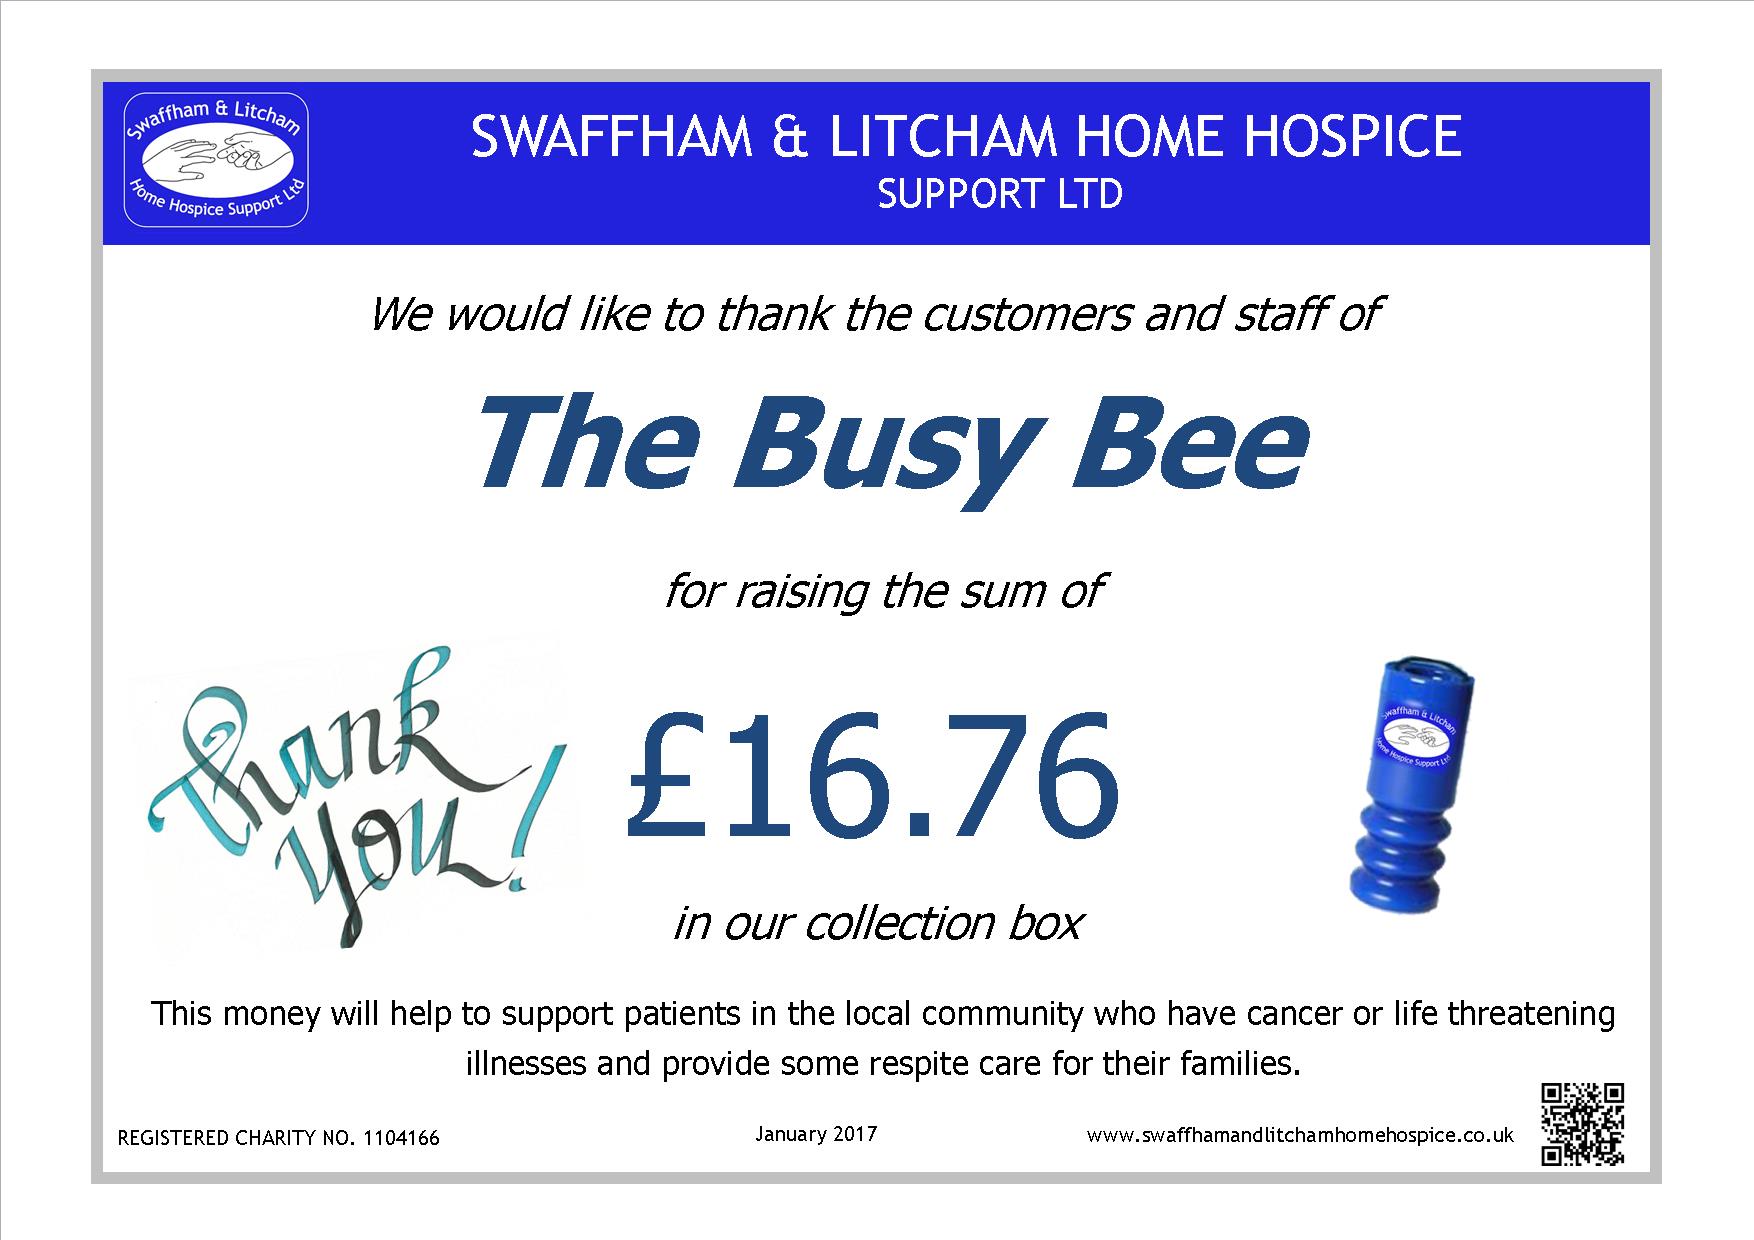 Money raised by Customer and Staff at the Busy Bee, January 2017